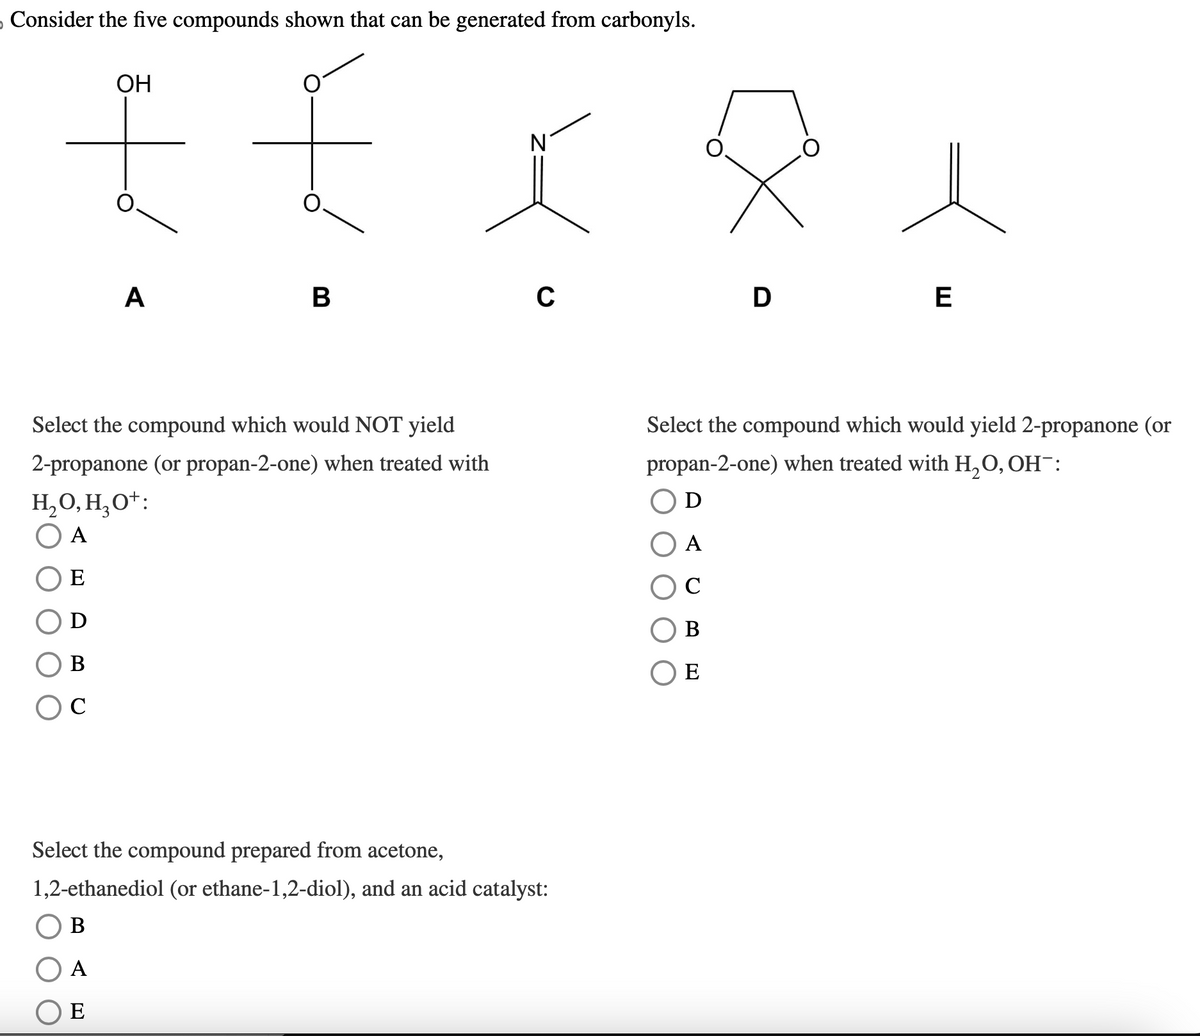 Consider the five compounds shown that can be generated from carbonyls.
OH
£ £
Ν
A
B
0
D
E
Select the compound which would NOT yield
2-propanone (or propan-2-one) when treated with
H₂O, H₂O+:
○ A
Select the compound which would yield 2-propanone (or
propan-2-one) when treated with H₂O, OH¯:
Ꭰ
E
B
C
Select the compound prepared from acetone,
1,2-ethanediol (or ethane-1,2-diol), and an acid catalyst:
B
A
E
A
C
B
○ E